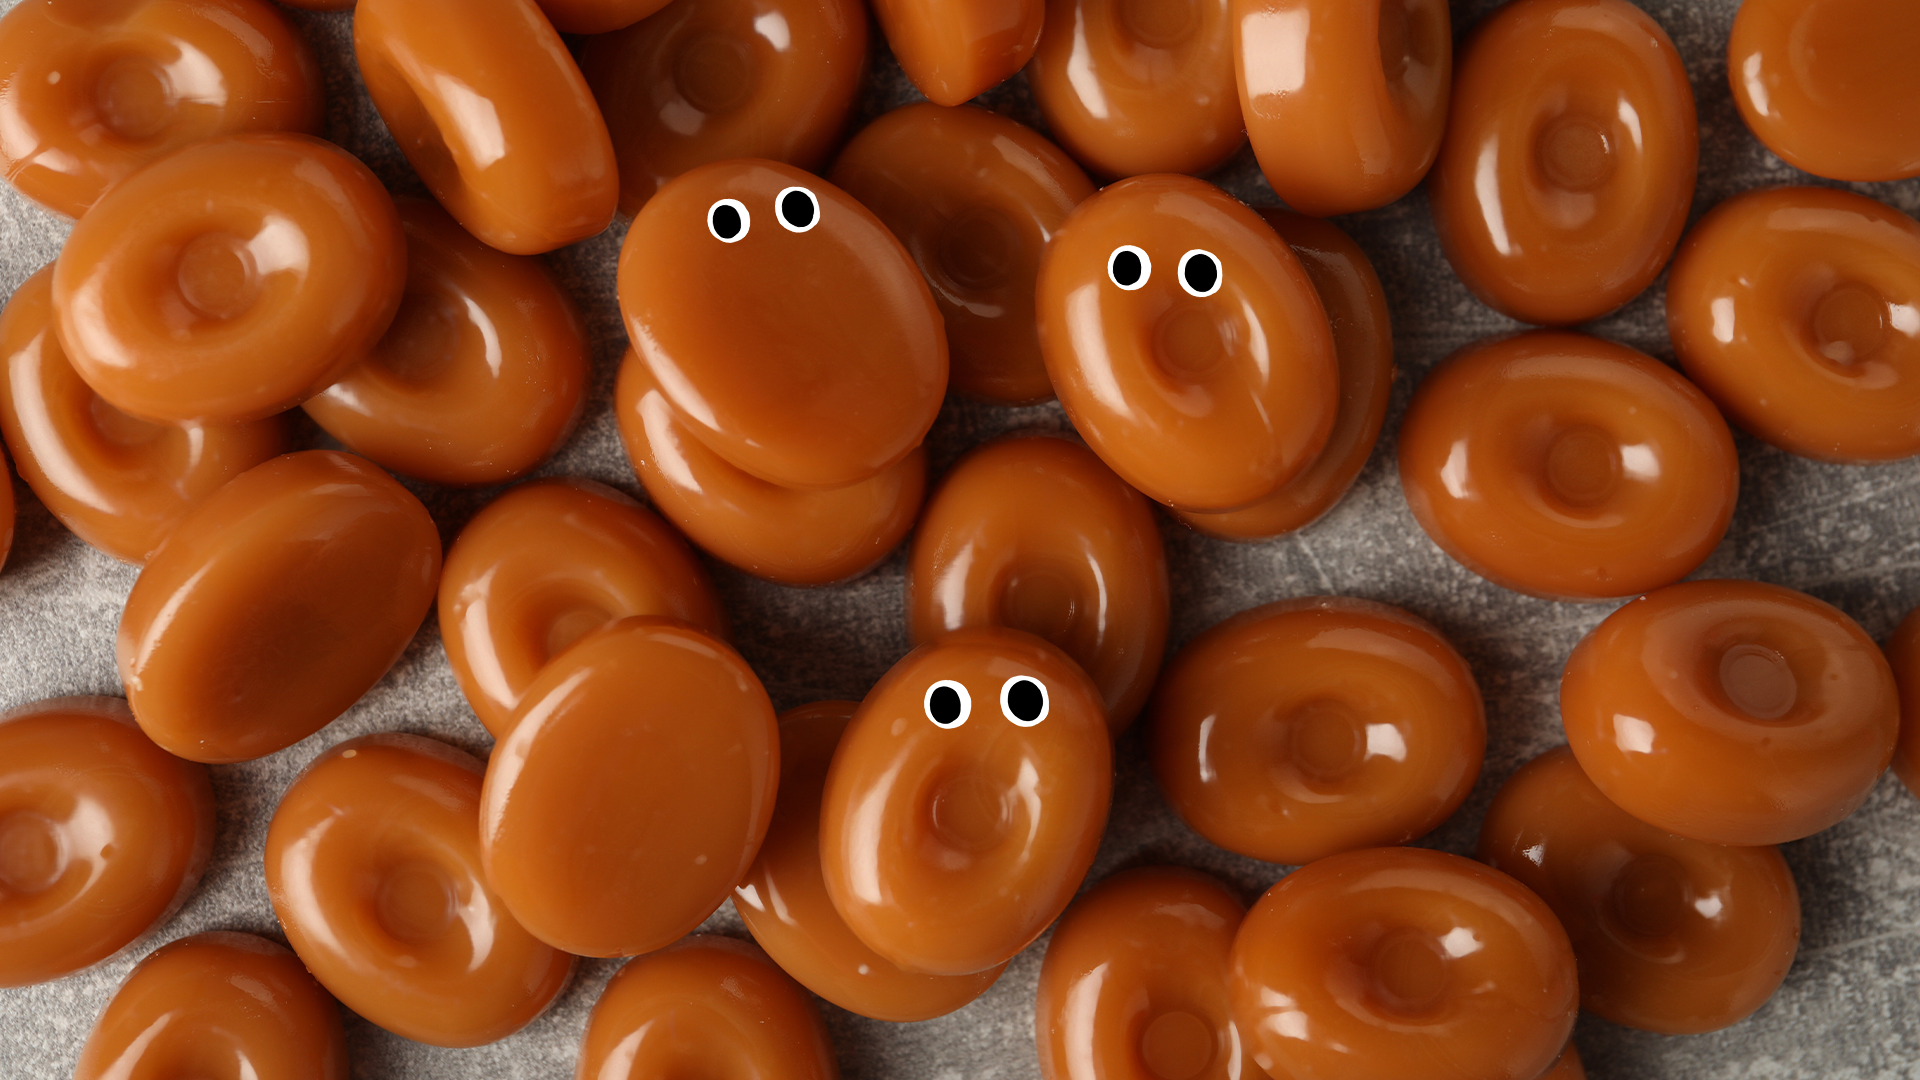 Sweets with goofy eyes